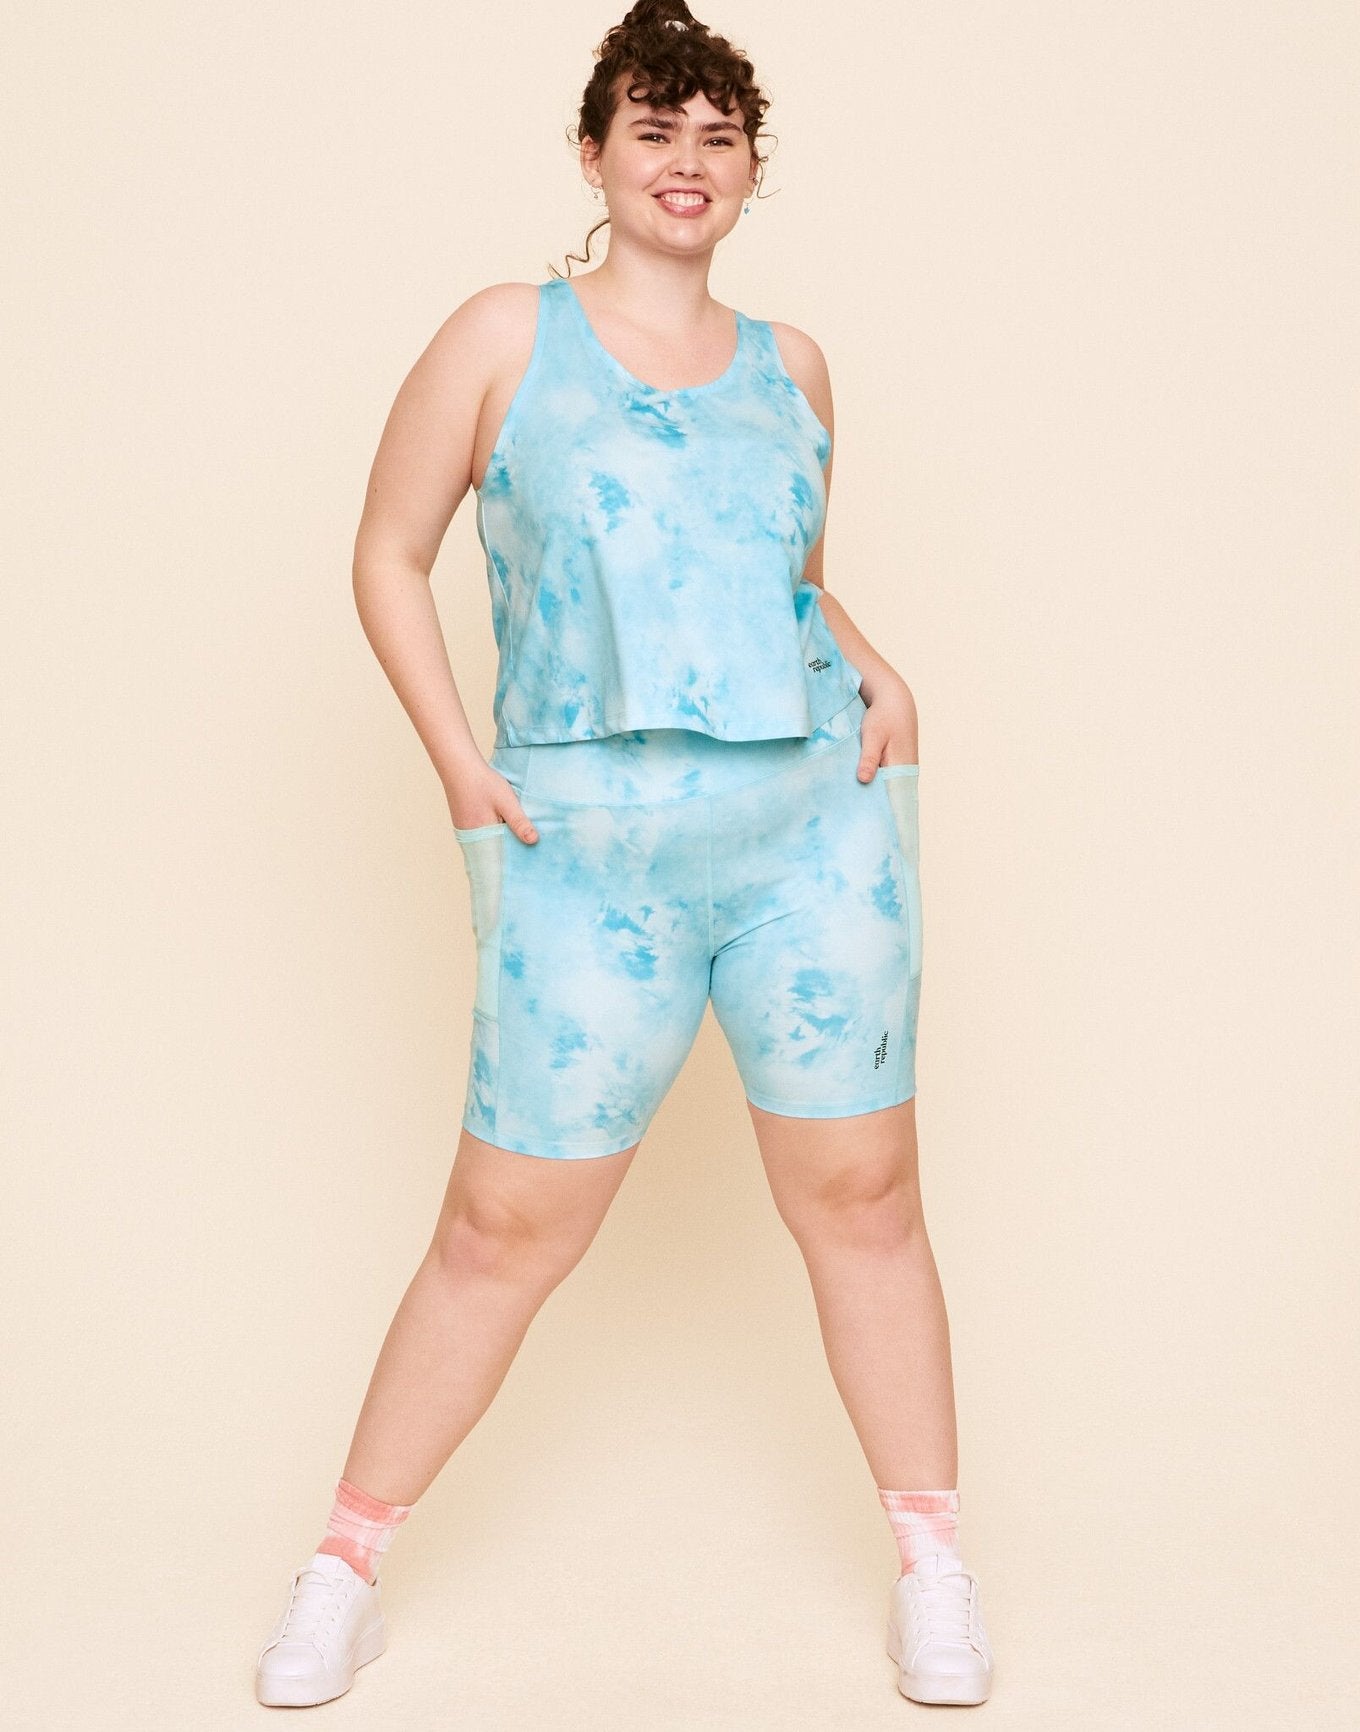 Earth Republic Anais High Waisted Short Biker Shorts in color Wash (Sports Print 3) and shape short